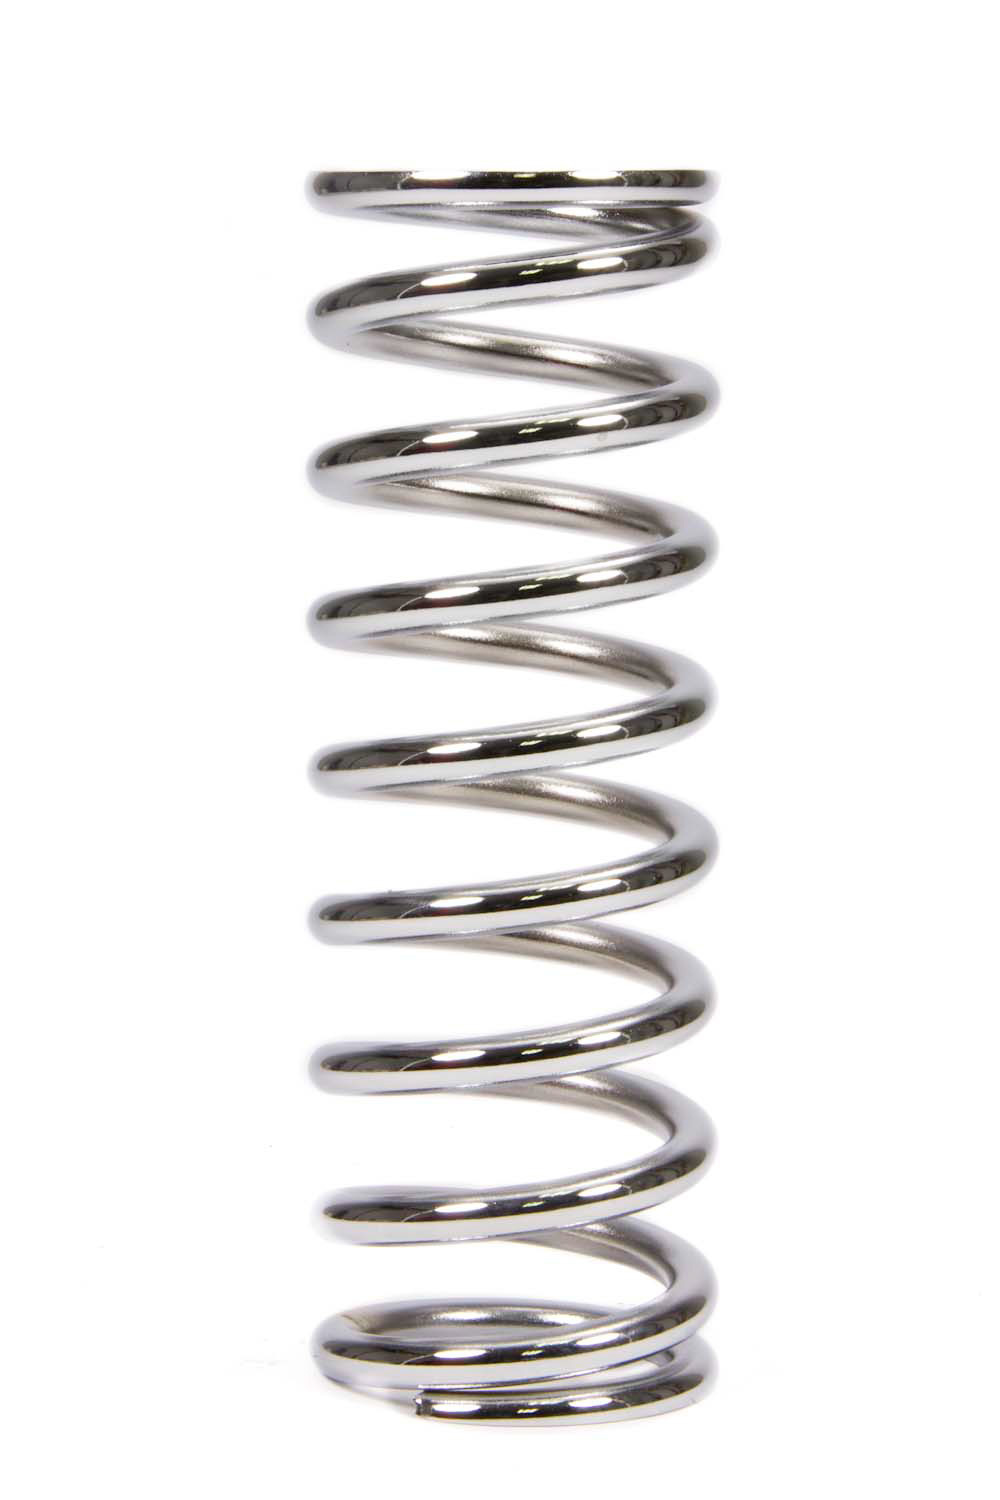 QA1 10CS200 Coil Spring, Coil-Over, 2.500 in ID, 10.000 in Length, 200 lb/in Spring Rate, Steel, Chrome, Each